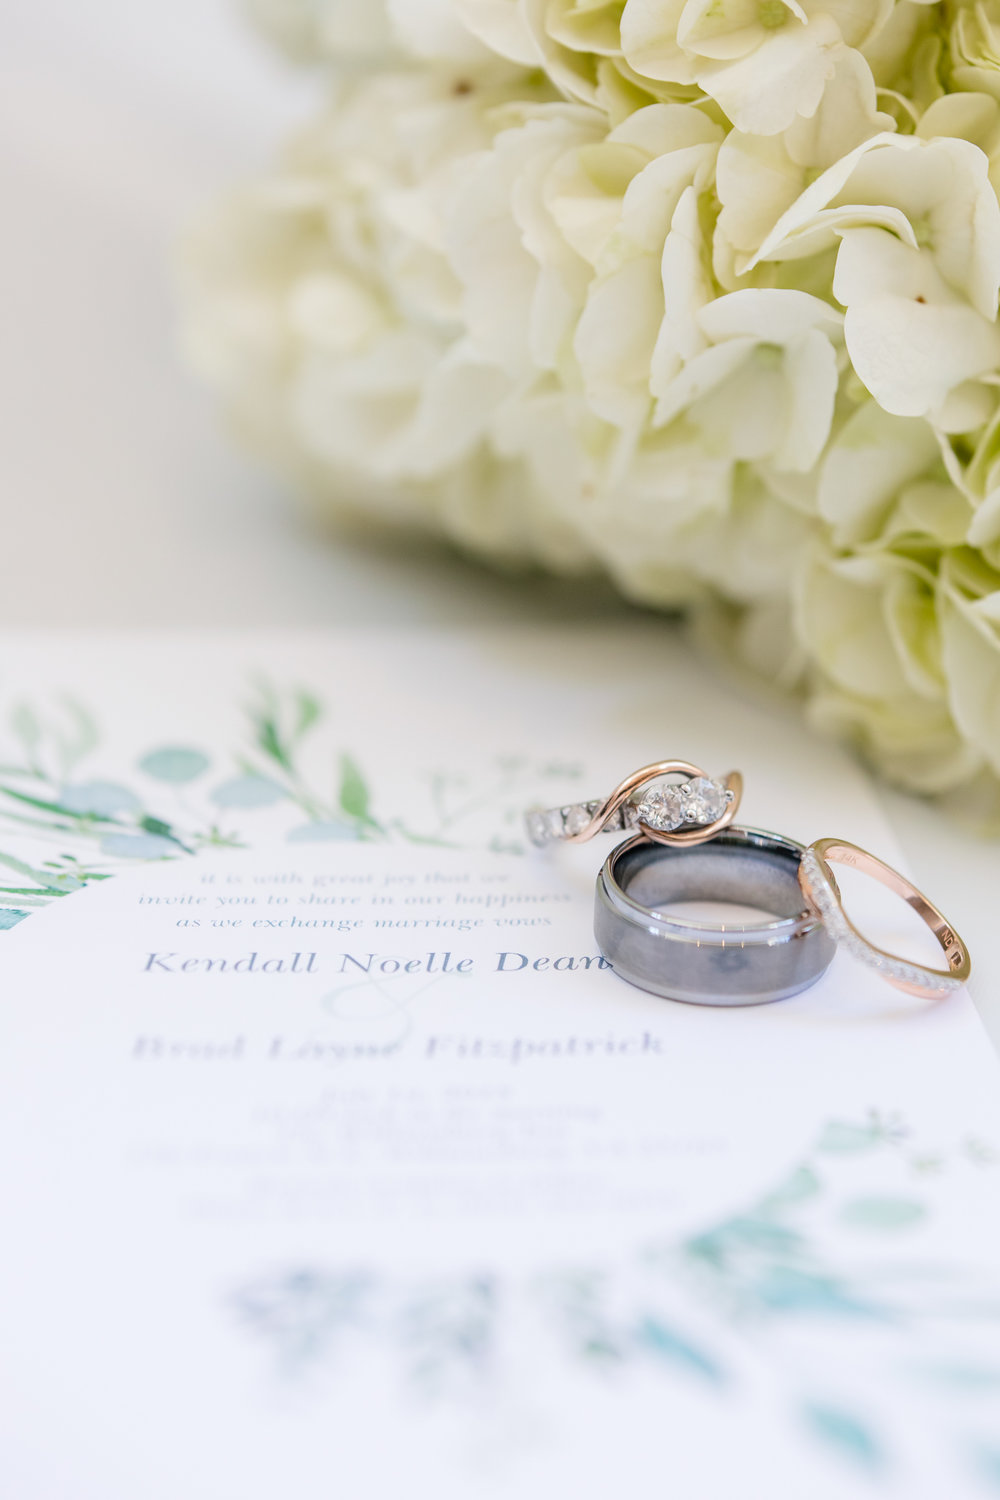 rings and invitation photo with florals in background